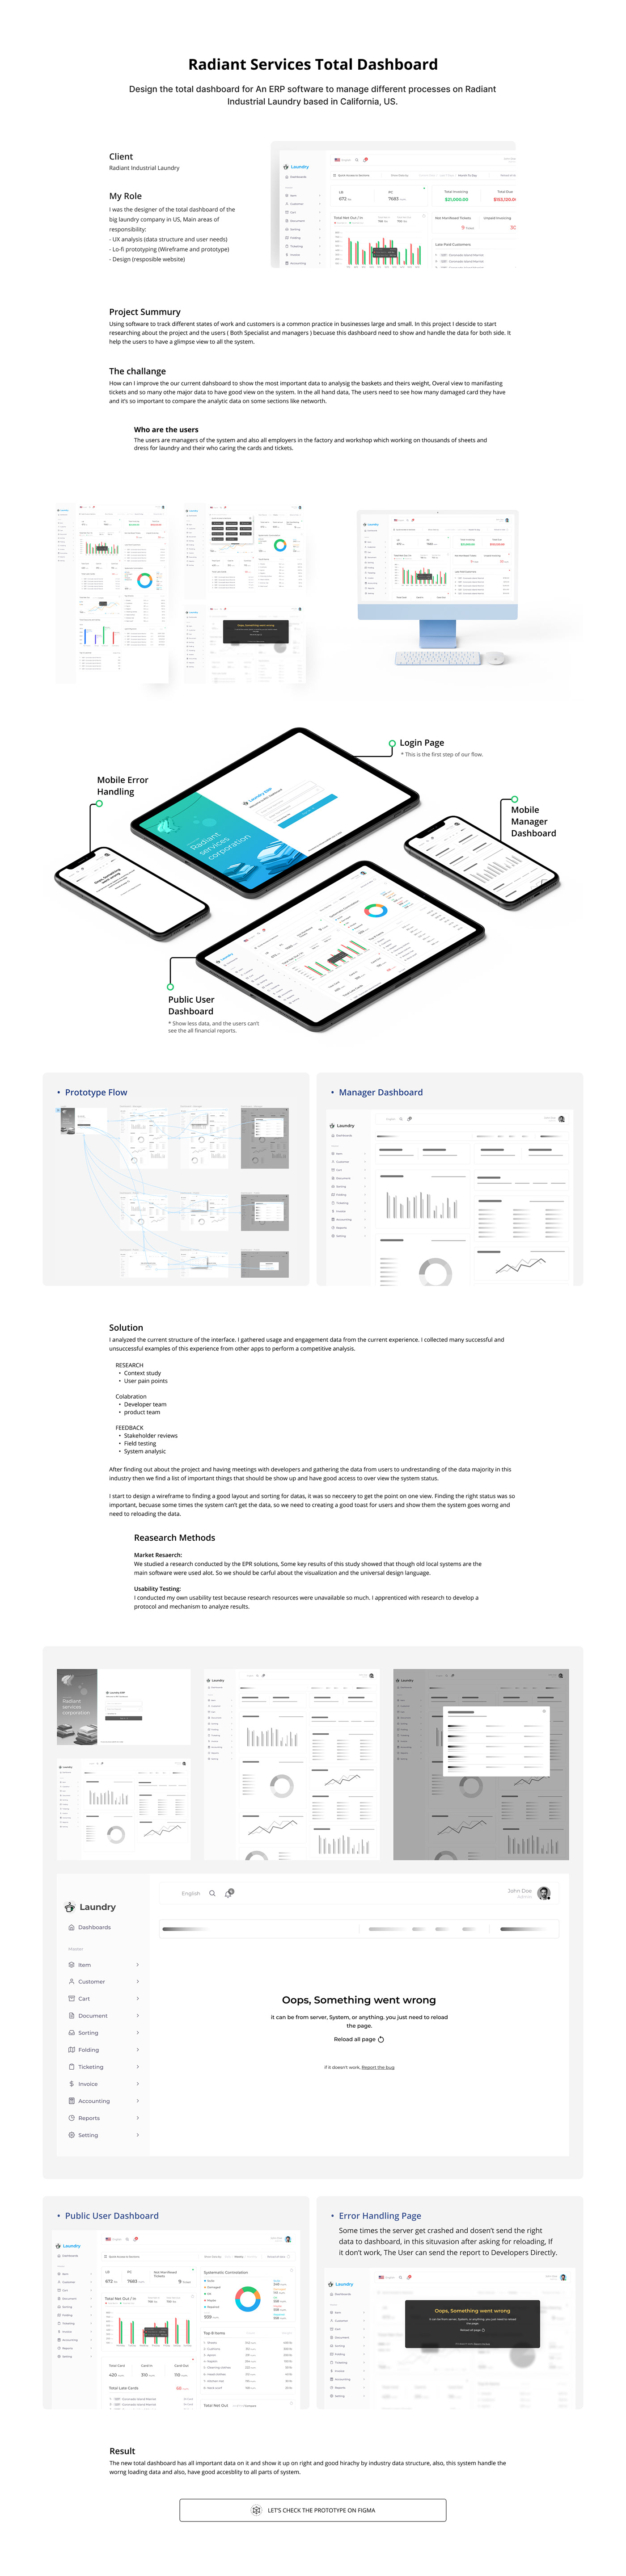 Case Study dashboard dashboard design product design  research user experience ux UX design ux/ui web app